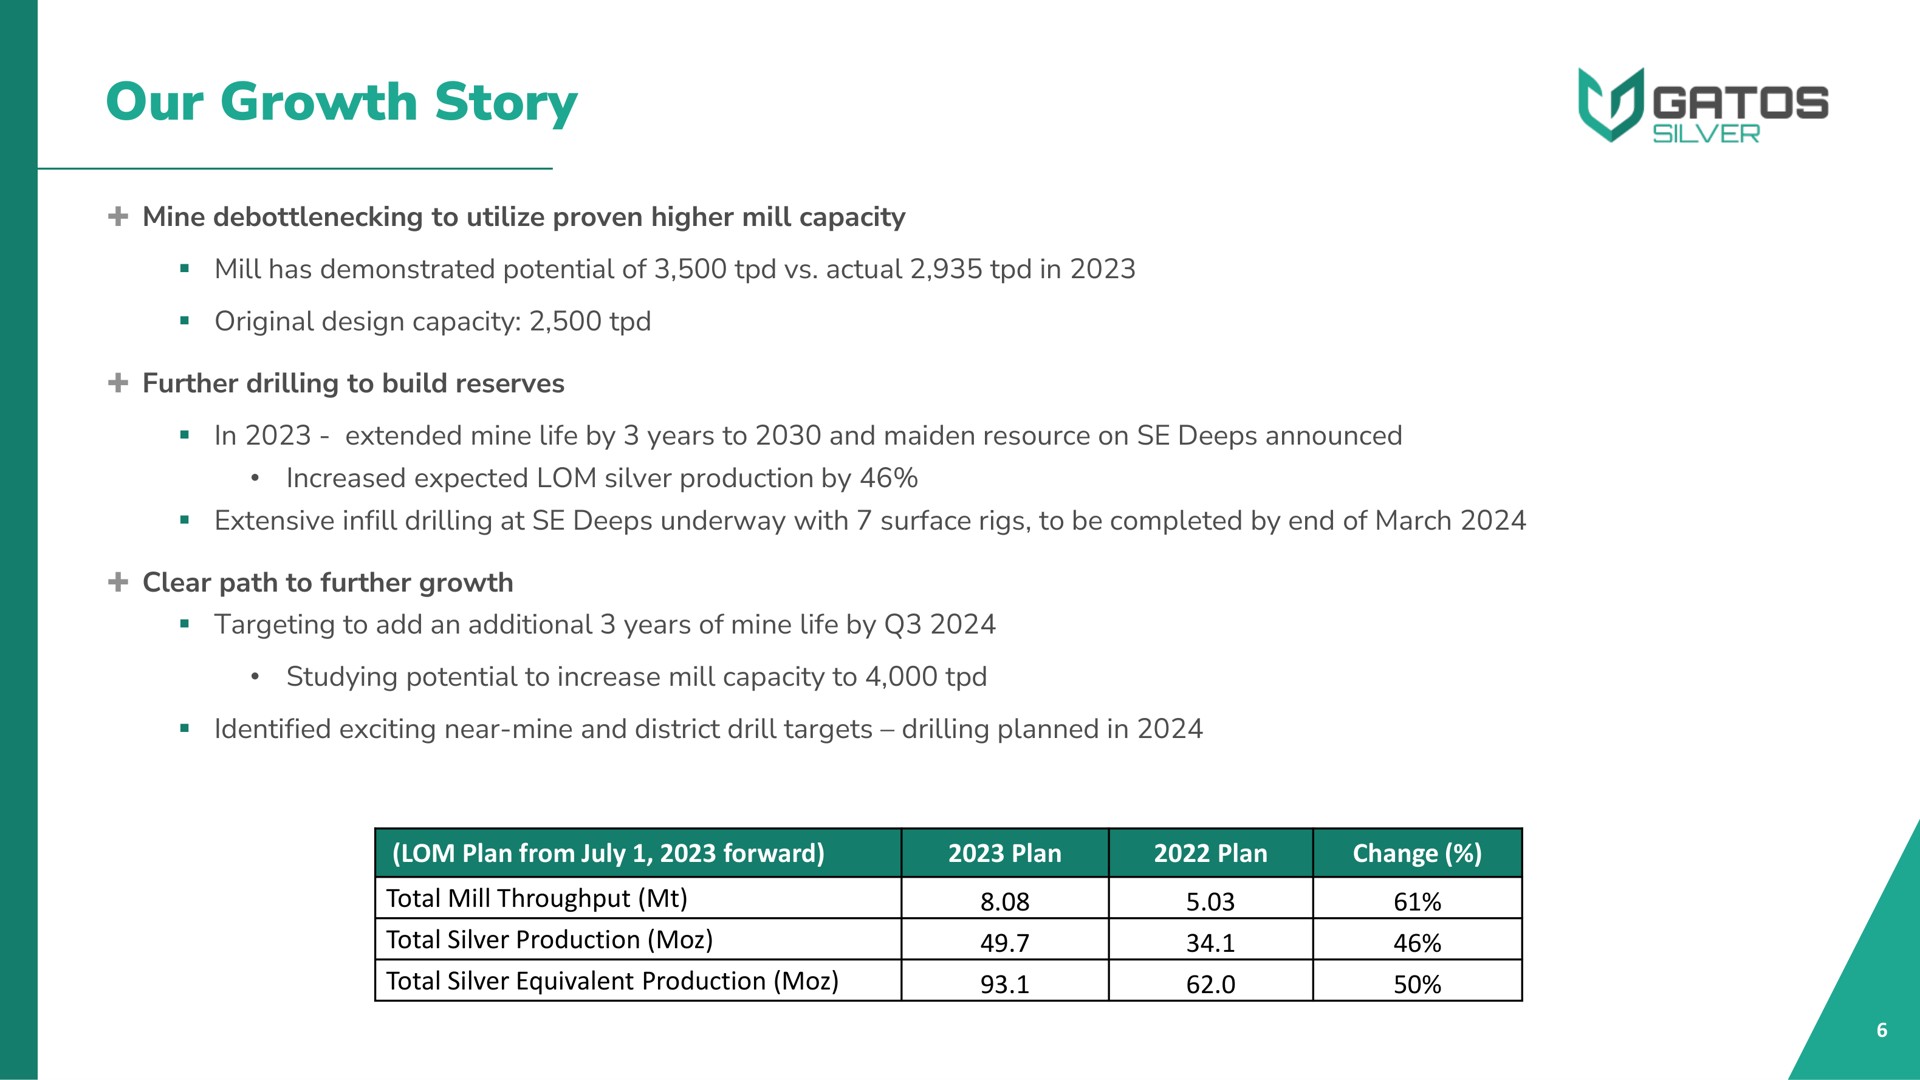 our growth story total silver equivalent production total mill throughput total silver production | Gatos Silver